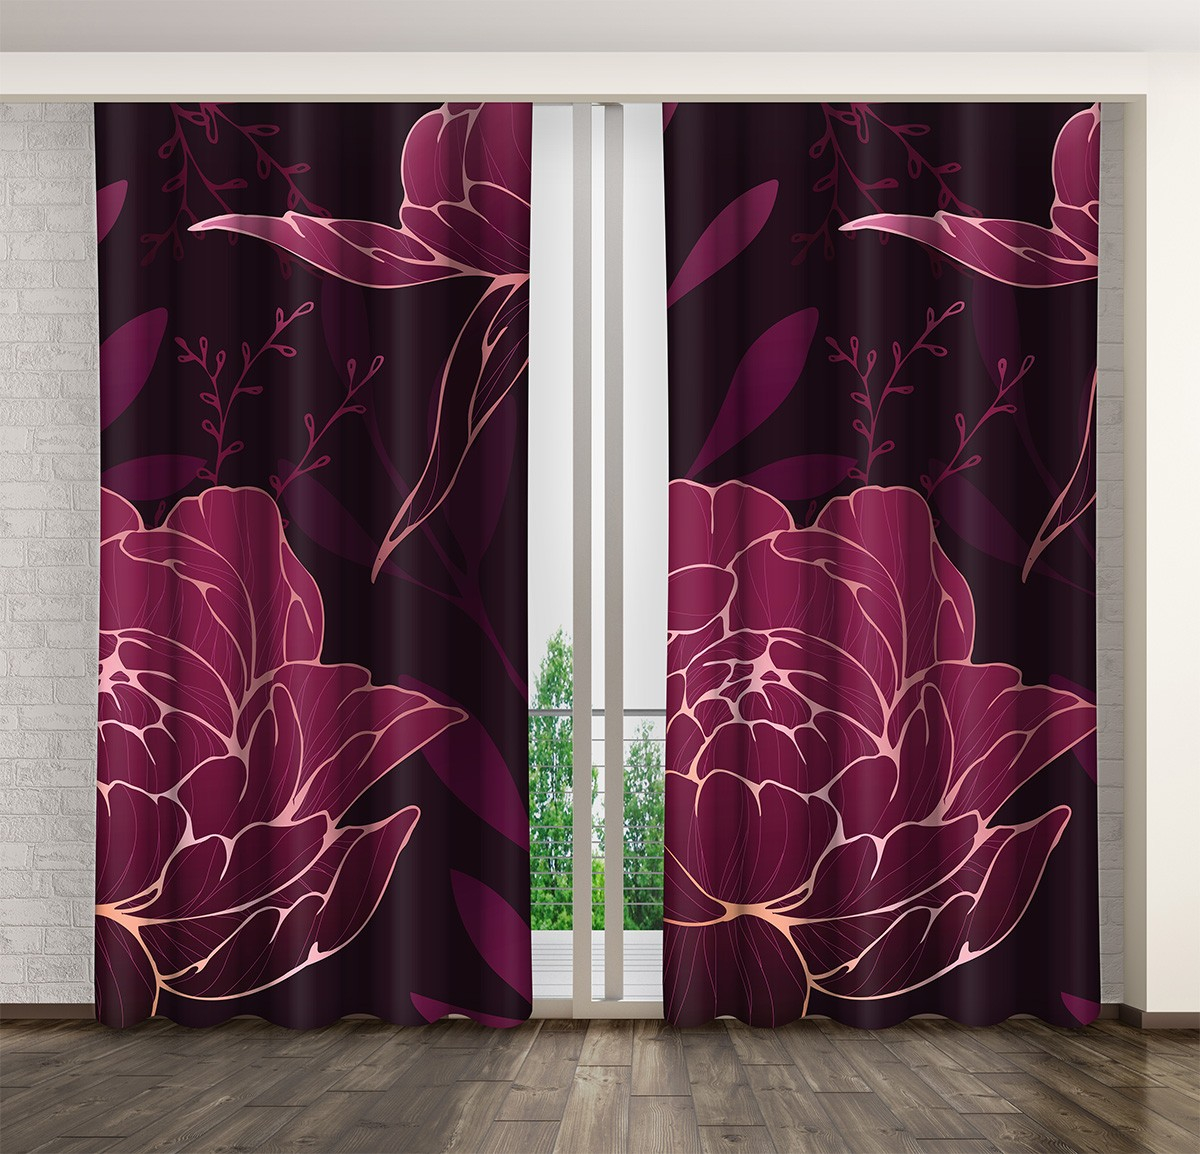 Curtain in burgundy color with flowers